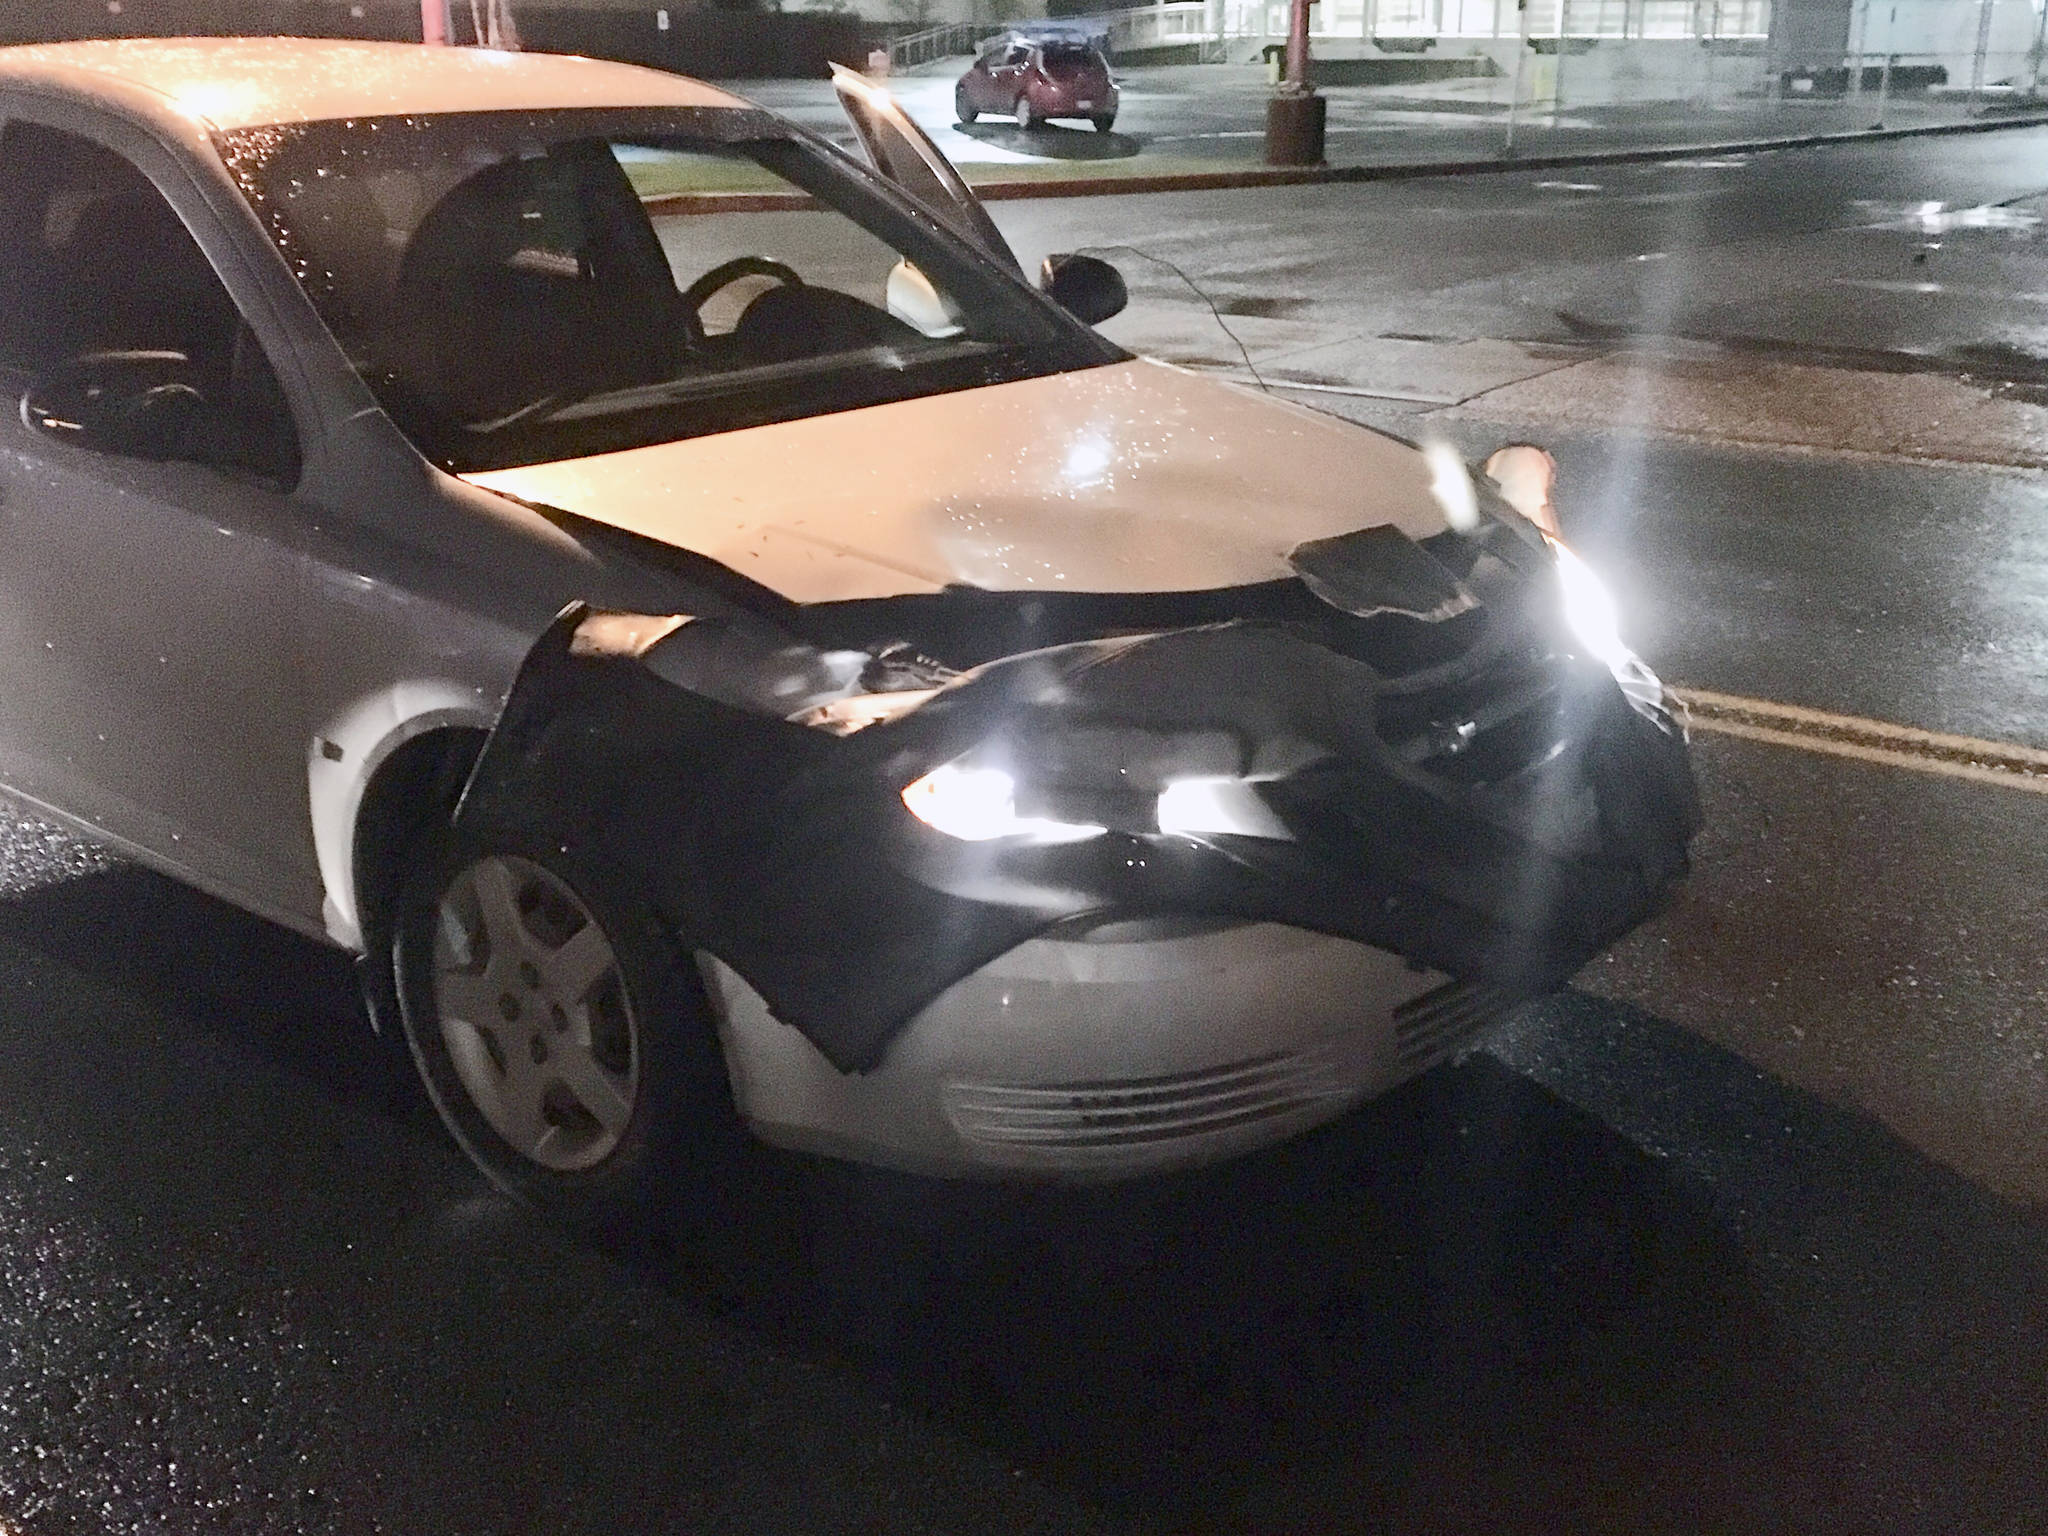 The vehicle involved in a crash in front of The Salvation Army Family Store is seen Wednesday night. (Michael S. Lockett | Juneau Empire)